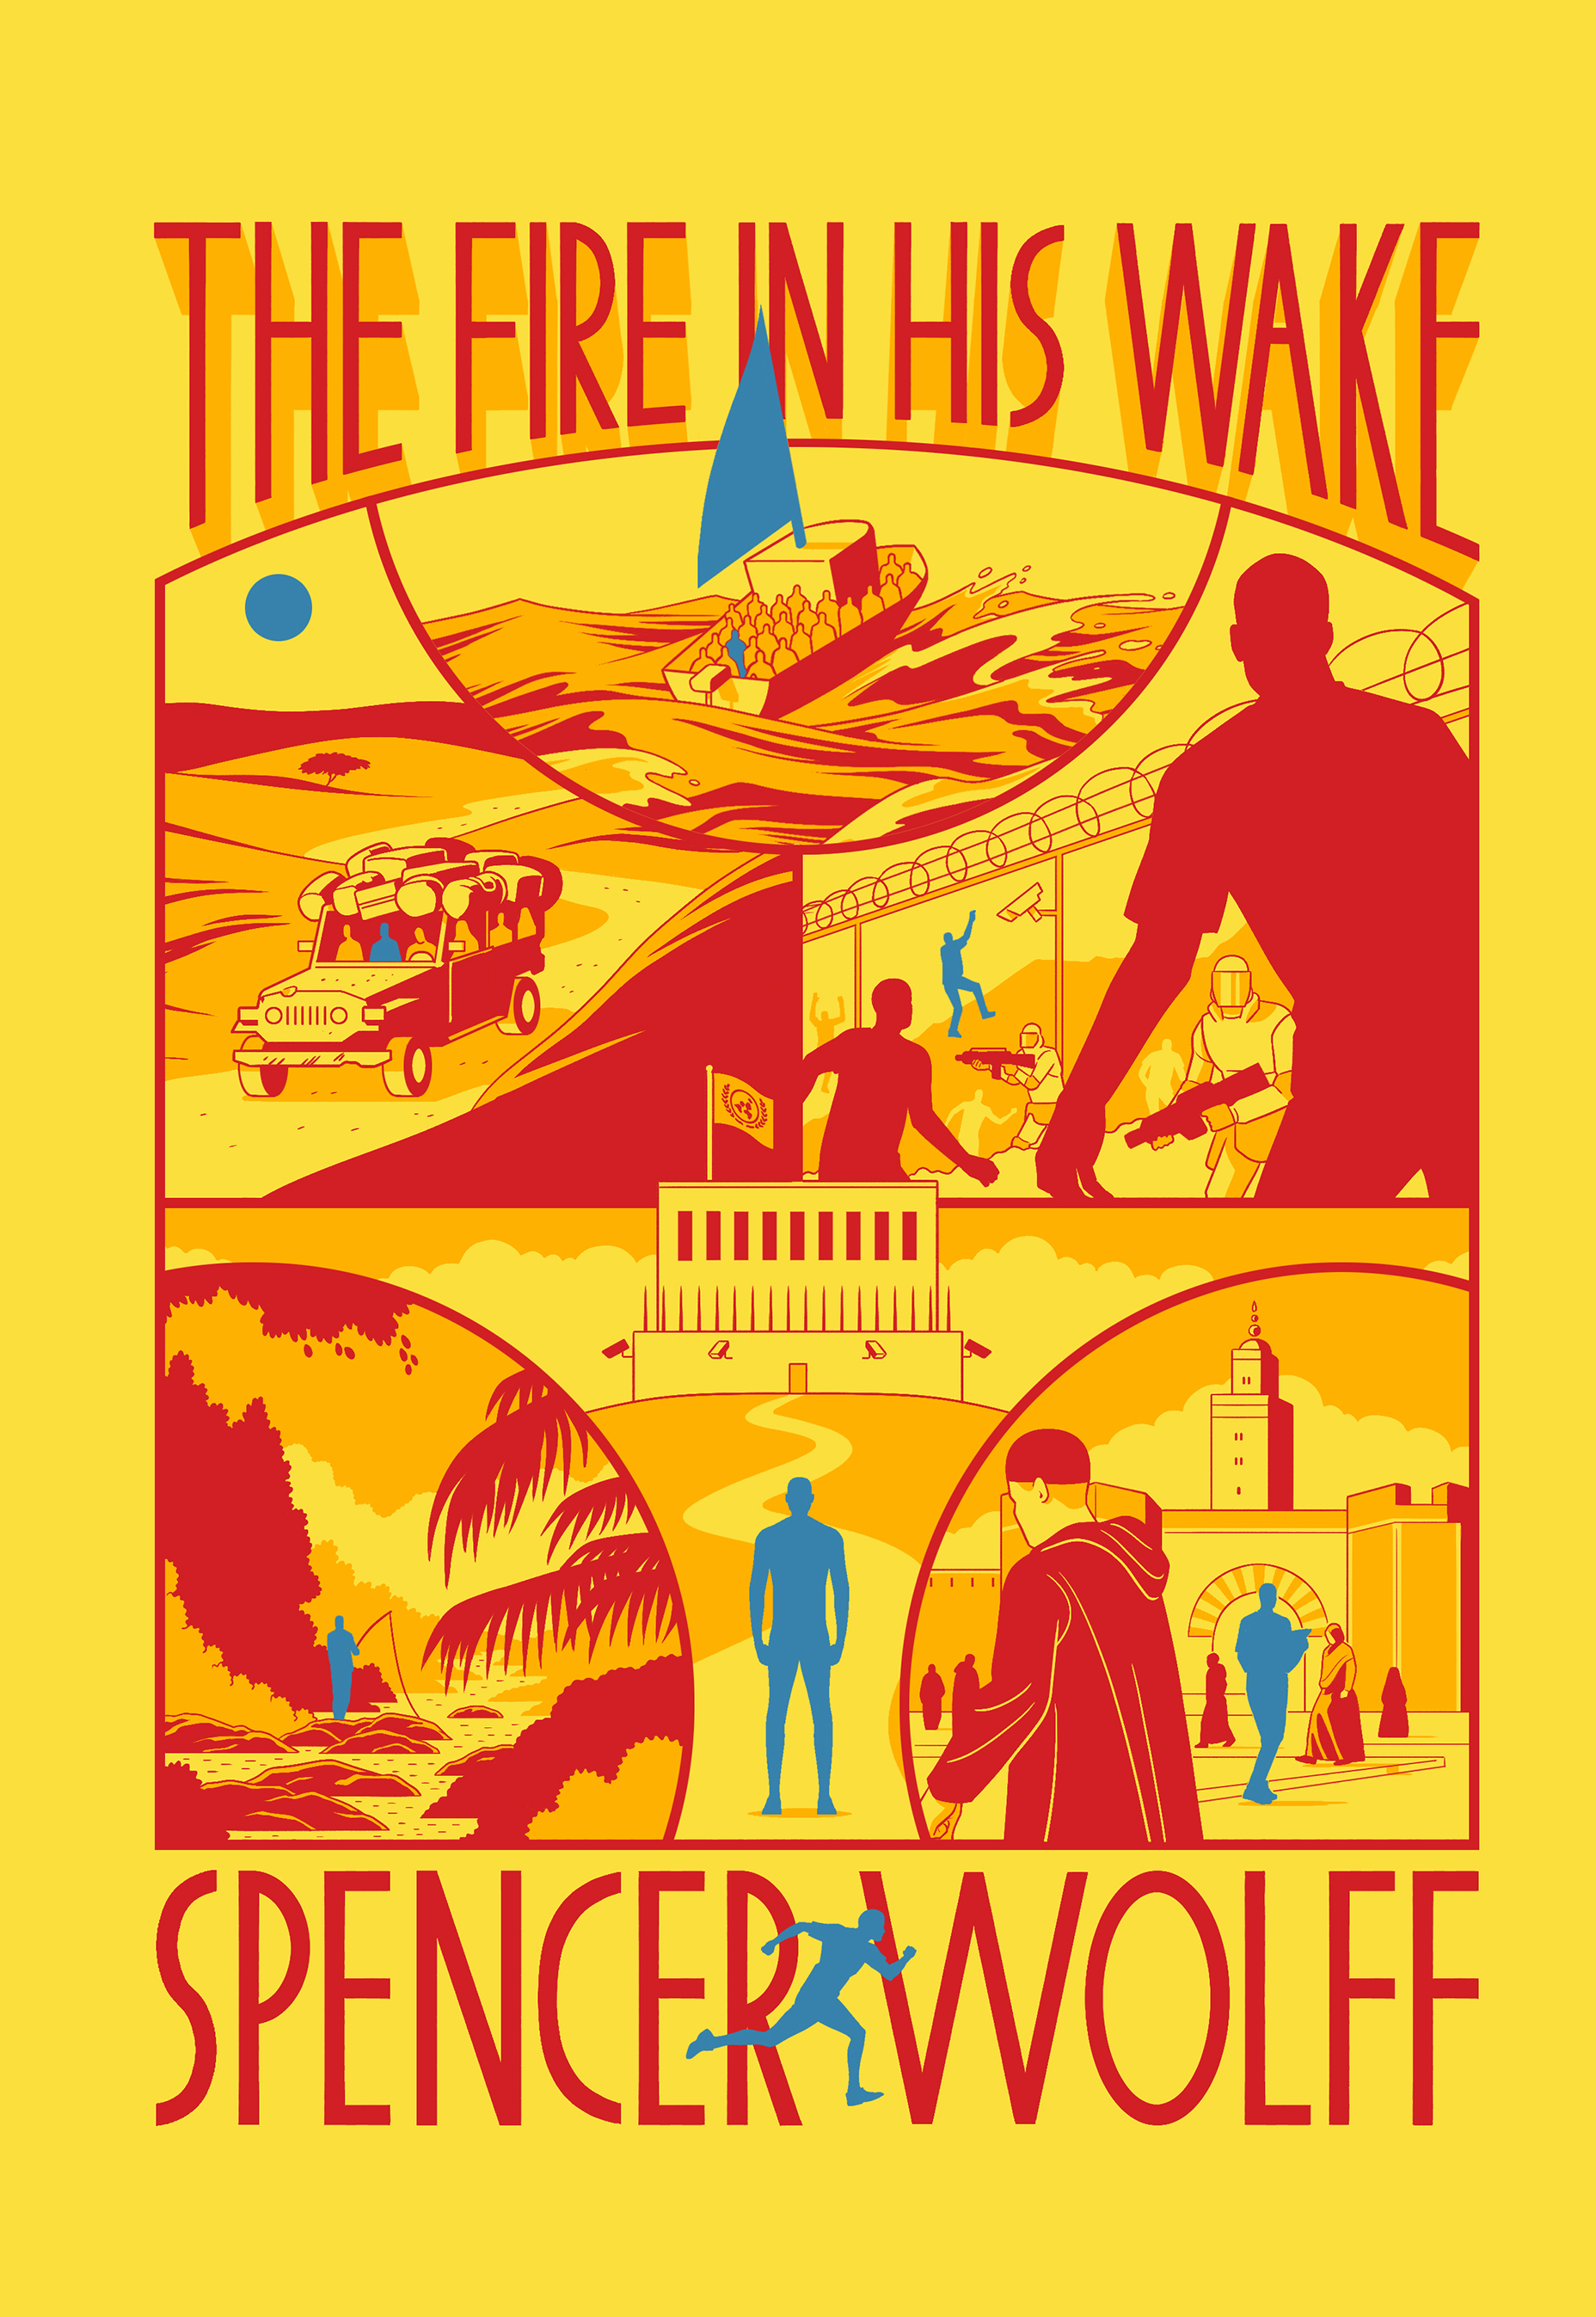 Virtual Book Launch: The Fire in His Wake by Spencer Wolff in conversation with Nyuol Lueth Tong